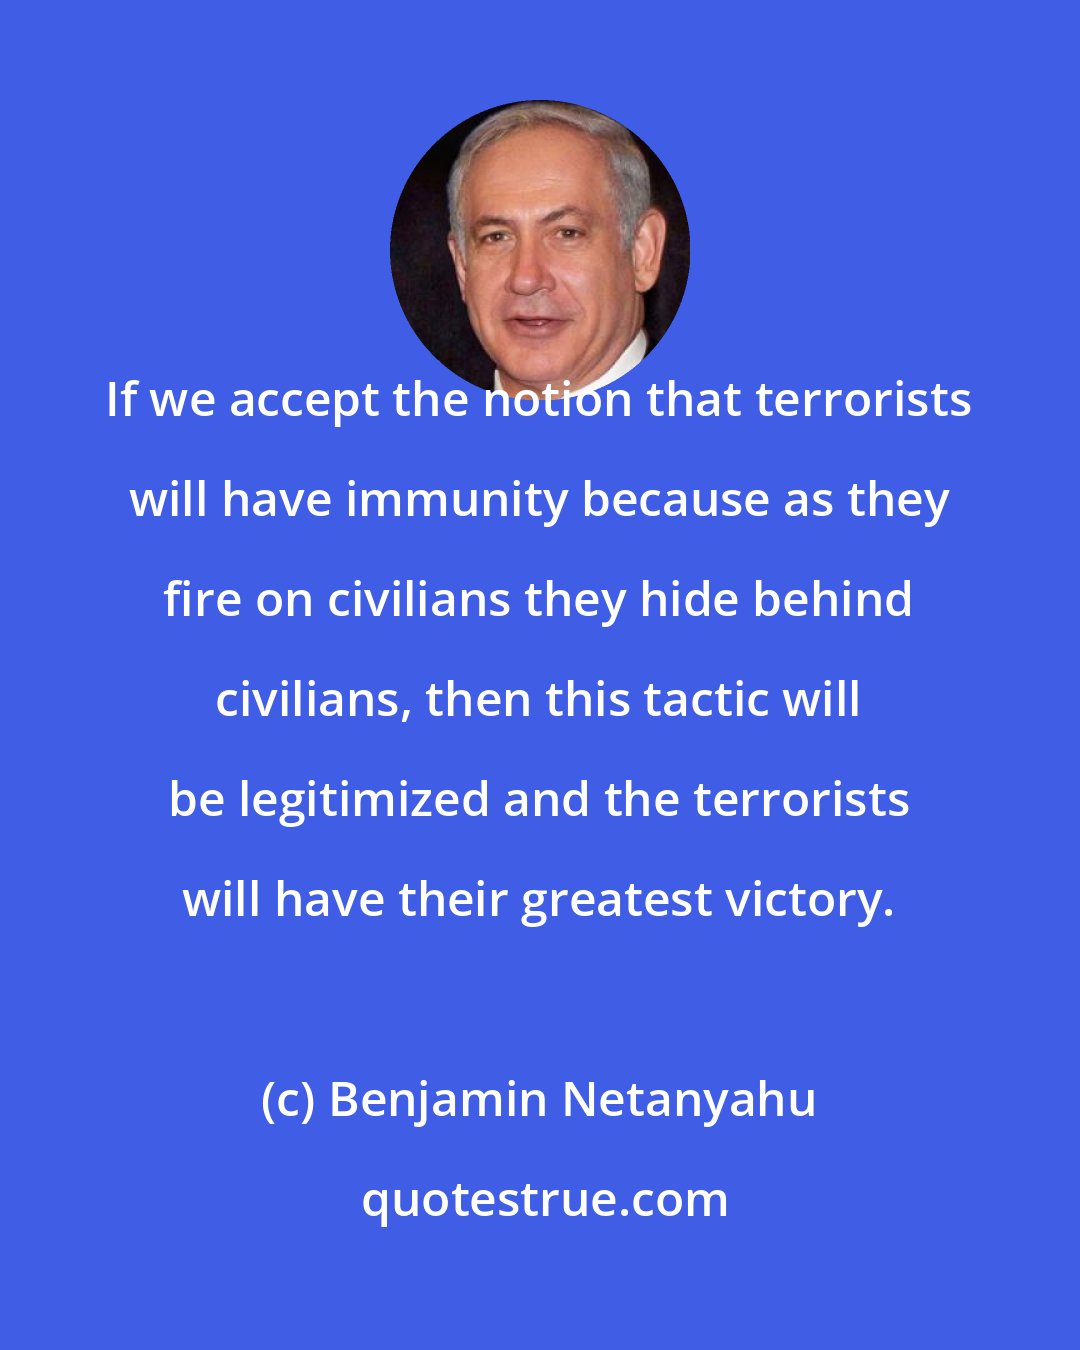 Benjamin Netanyahu: If we accept the notion that terrorists will have immunity because as they fire on civilians they hide behind civilians, then this tactic will be legitimized and the terrorists will have their greatest victory.